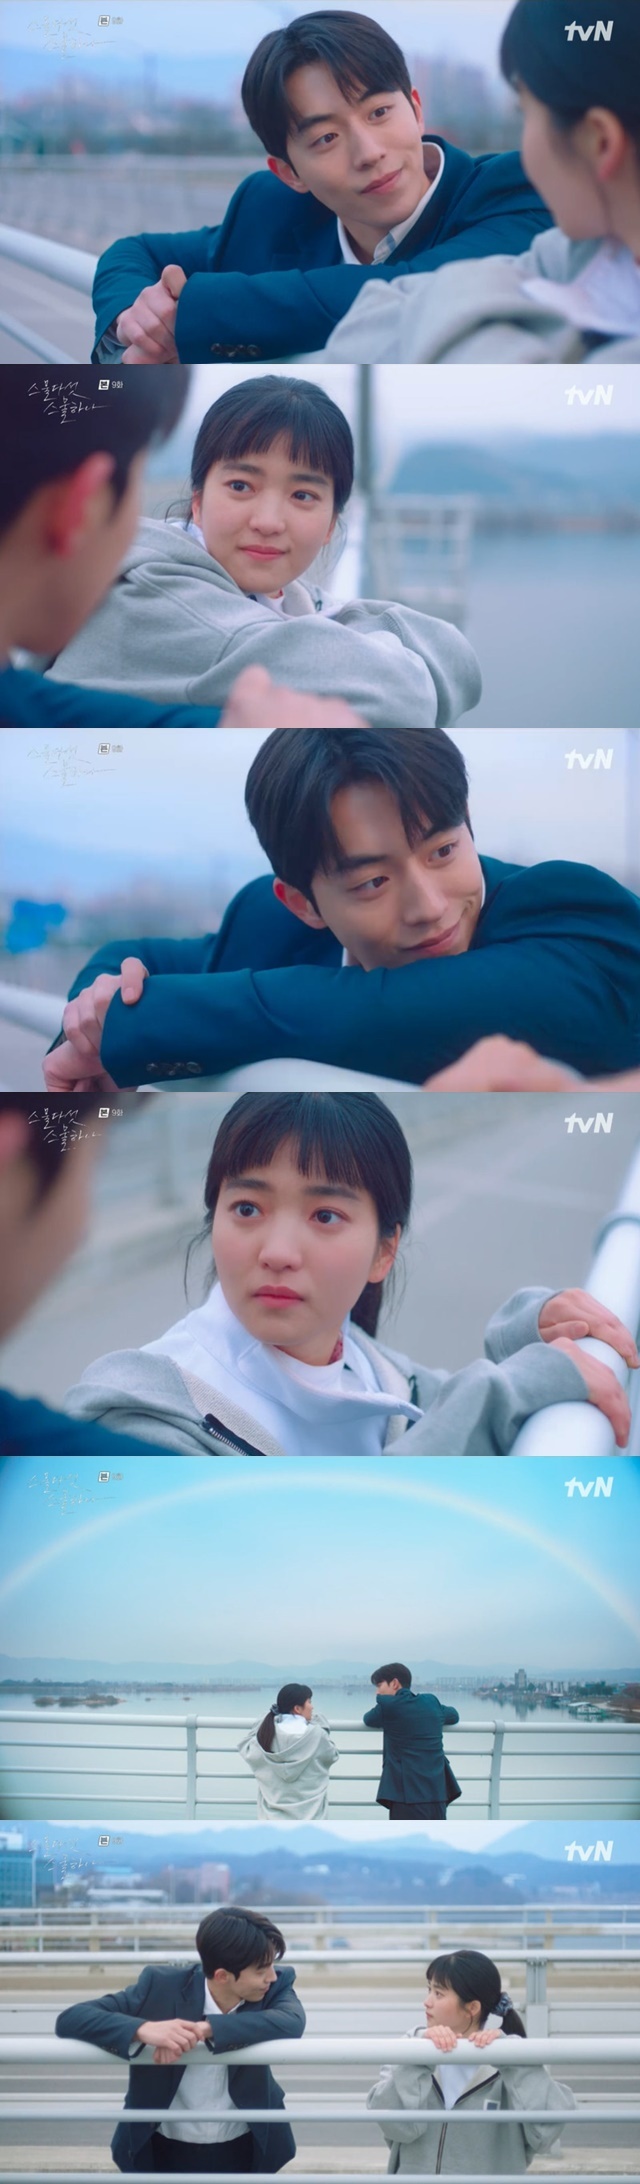 Nam Joo-hyuk possessed the house theater The Earrings of Madame de... with fond love Confessions to Kim Tae-ri.In the 9th episode of TVNs Saturday drama Twenty Five Twinty One (played by Kwon Do-eun/directed by Jung Ji-hyun), which aired on March 12, Baek Lee Jin (played by Nam Joo-hyuk) made love to Na Hee-do (played by Kim Tae-ri).Na Hee-do only thought that Lee Jin was a friend in the chat, and after Confessions, he knew that Lee Jin was not an ingenious person.Lee Jin asked Na Hee-do, What do you think of our relationship? Na Hee-do said, Im really crazy about you these days. Im jealous of you.But I feel inferiority. What do you think that means? I dont know.Lee Jin laughed at Na Hee-dos candid Confessions and said, Yes, think hard, Im done, Ive never done it.After a while, Na Hee-do thought to Lee Jin, The words that can explain our relationship have not yet been created in the world.Theres nothing in the distinction that people make, and we know what were in, Boni, so we can define it.When Lee Jin said, I like rainbows, Na Hee-do replied, I like scissors, and Lee Jin said, You should try to avoid it again in the future.I dont want to be quiet, said Na Hee-do, who said, I dont think you hated it. Lee Jin said, Do you think that explains that? Youve been the one who caused me many times.Take responsibility, she said, expressing her affection to Na Hee-do.To Lee Jin, Na Hee-do said, What are you? You did not worry about defining our relationship?When asked what is your answer? When Lee Jin answered, Its not a rainbow, Nahees mother, Shin Jae-kyung (Seo Jae-hee), returned home and the conversation was cut off.Shin Jae-kyung knew that her daughter, Na Hee-do, was close to Baek Lee Jin and asked Baek to not be in charge of the sports department.Lee Jin made the documentary program and made Na Hee-do and Ko Yu Rim (Bona Boone) the first protagonist, and when the PIDI in charge ordered Na Hee-do and Ko Yu Rim to perform a simultaneous hit for dramatic production, Na Hee-do was angry.Lee Jin raised his voice to his senior Peedy, and headed to the hospital with Na Hee-do, saying, If youre really hurt, Ill kill you. Im sorry.I should have been there.